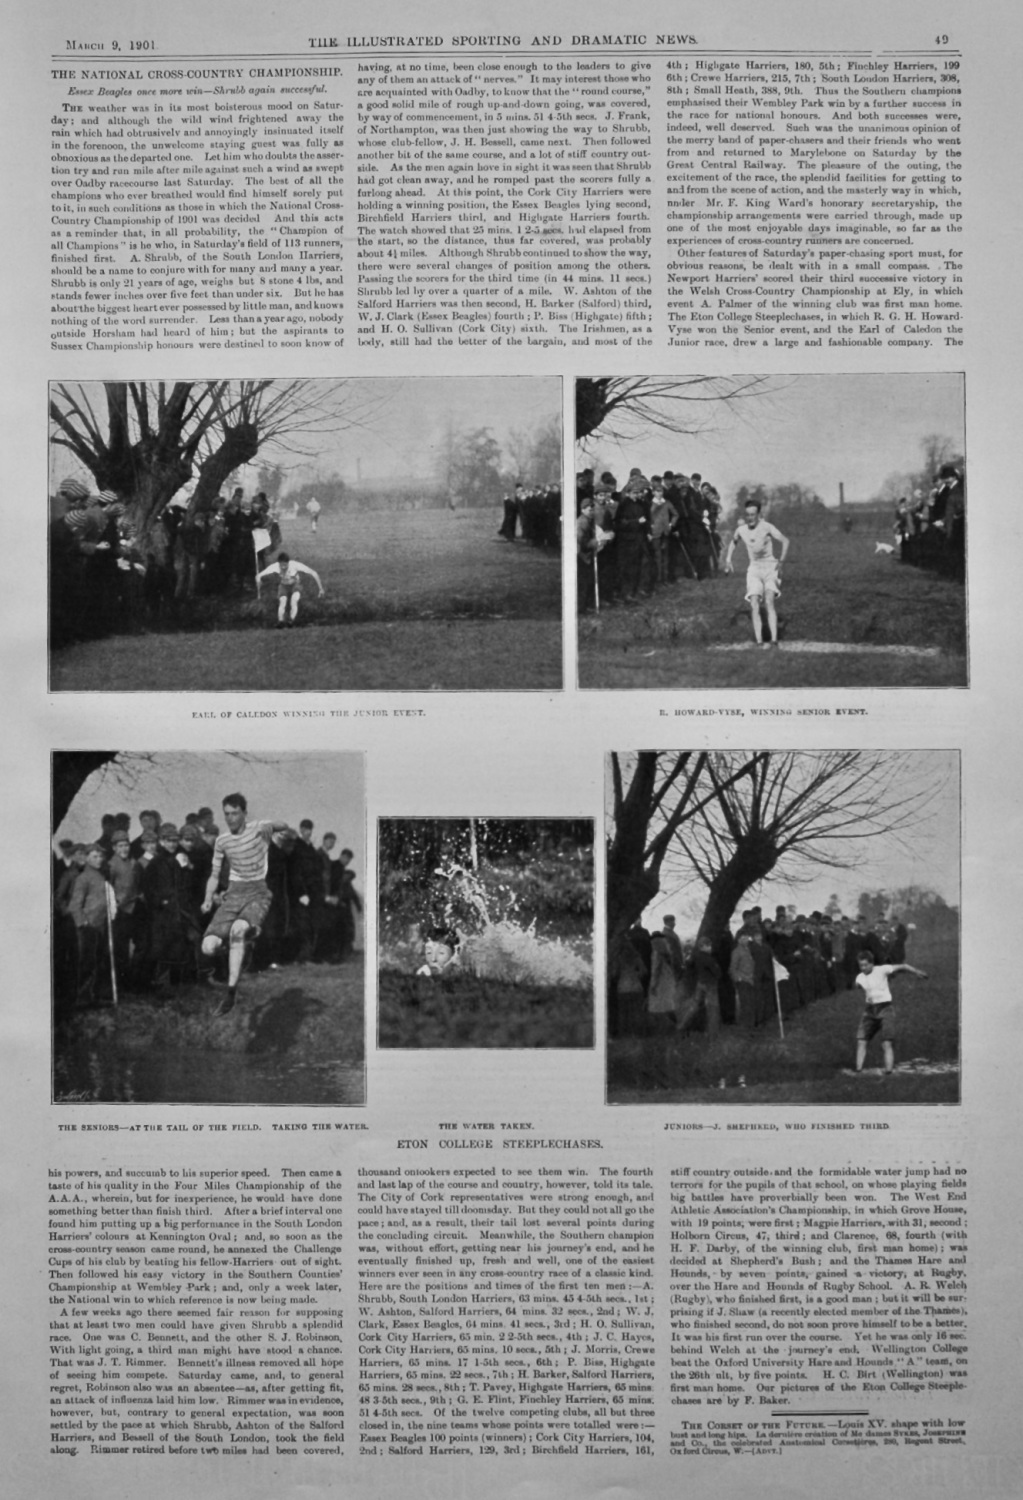 The National Cross-Country Championship.  1901.